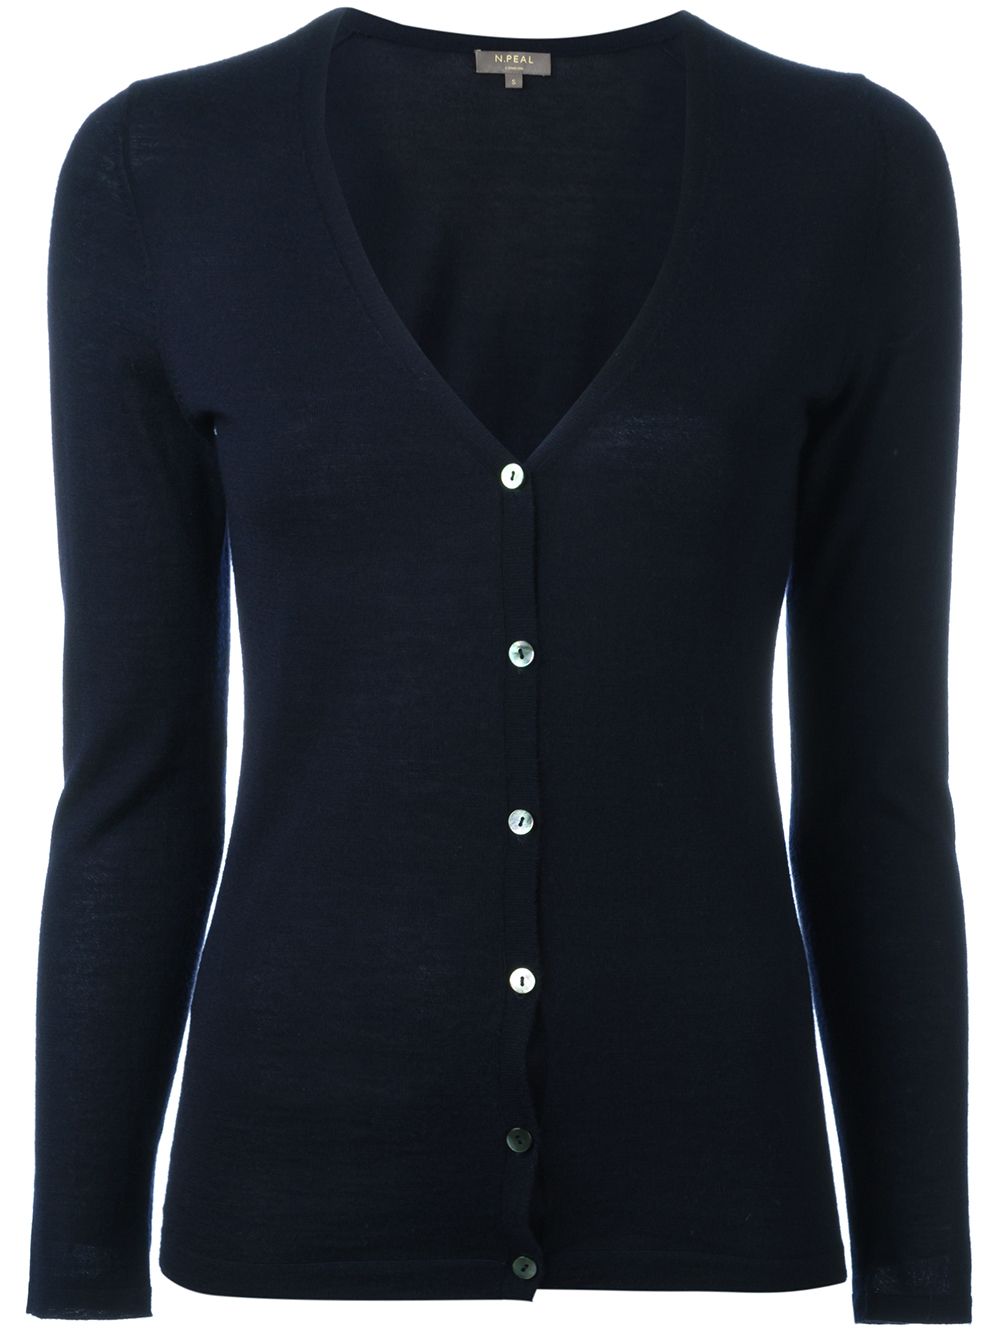 N.Peal cashmere button up cardigan - Blue von N.Peal